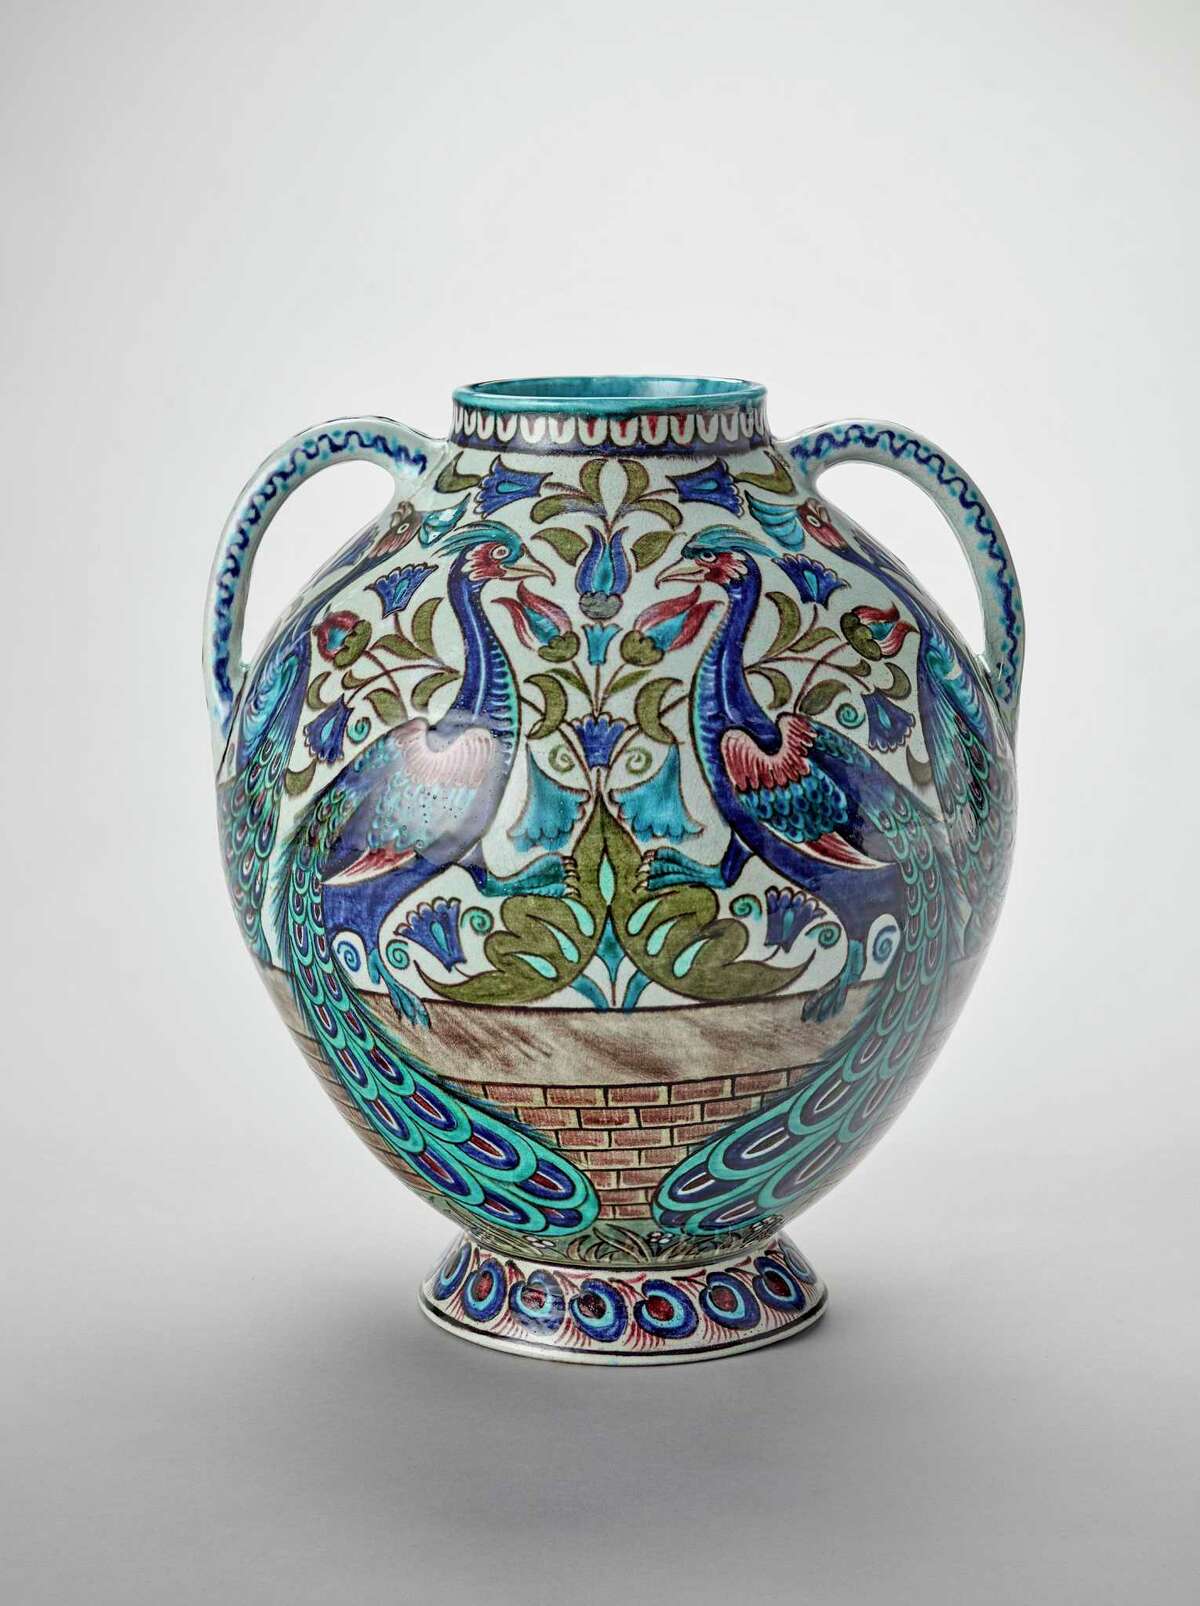 An earthenware peacock vase, circa 1885, is part of the San Antonio Museum of Art as part of the exhibit “Victorian Radicals: From the Pre-Raphaelites to the Arts and Crafts Movement.”